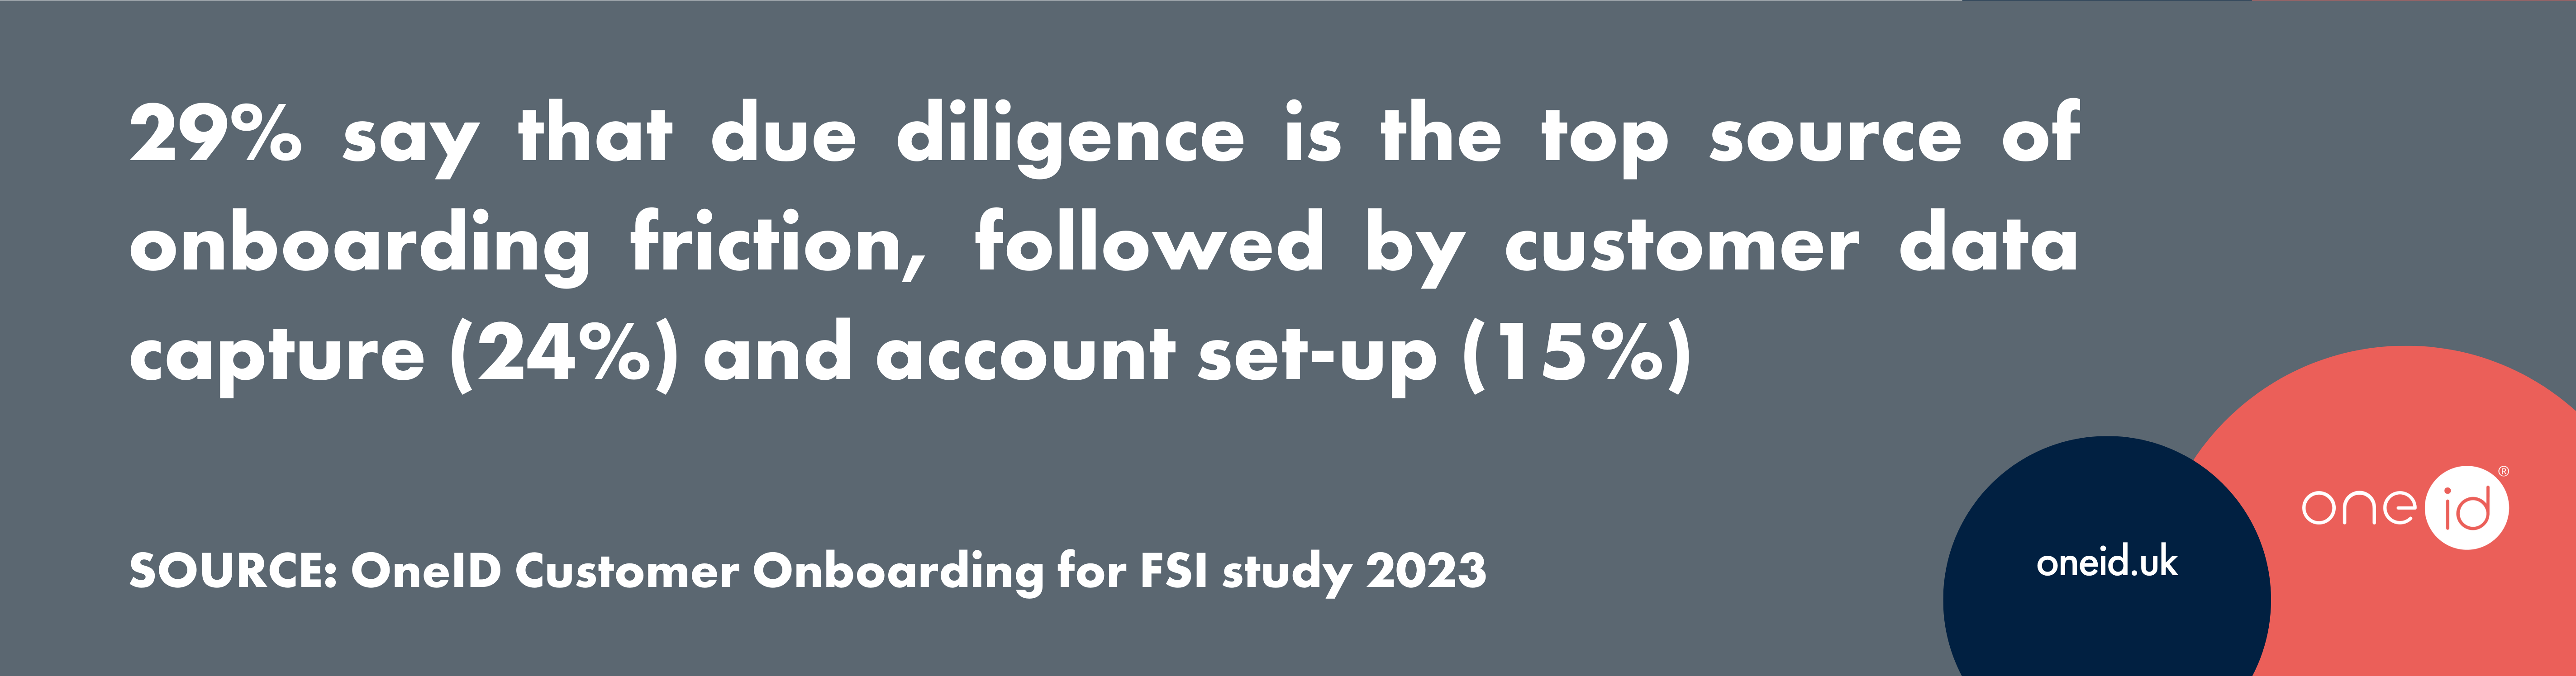 29% say that due diligence is the top source of onboarding friction, followed by customer data capture (24%) and account set-up (15%)